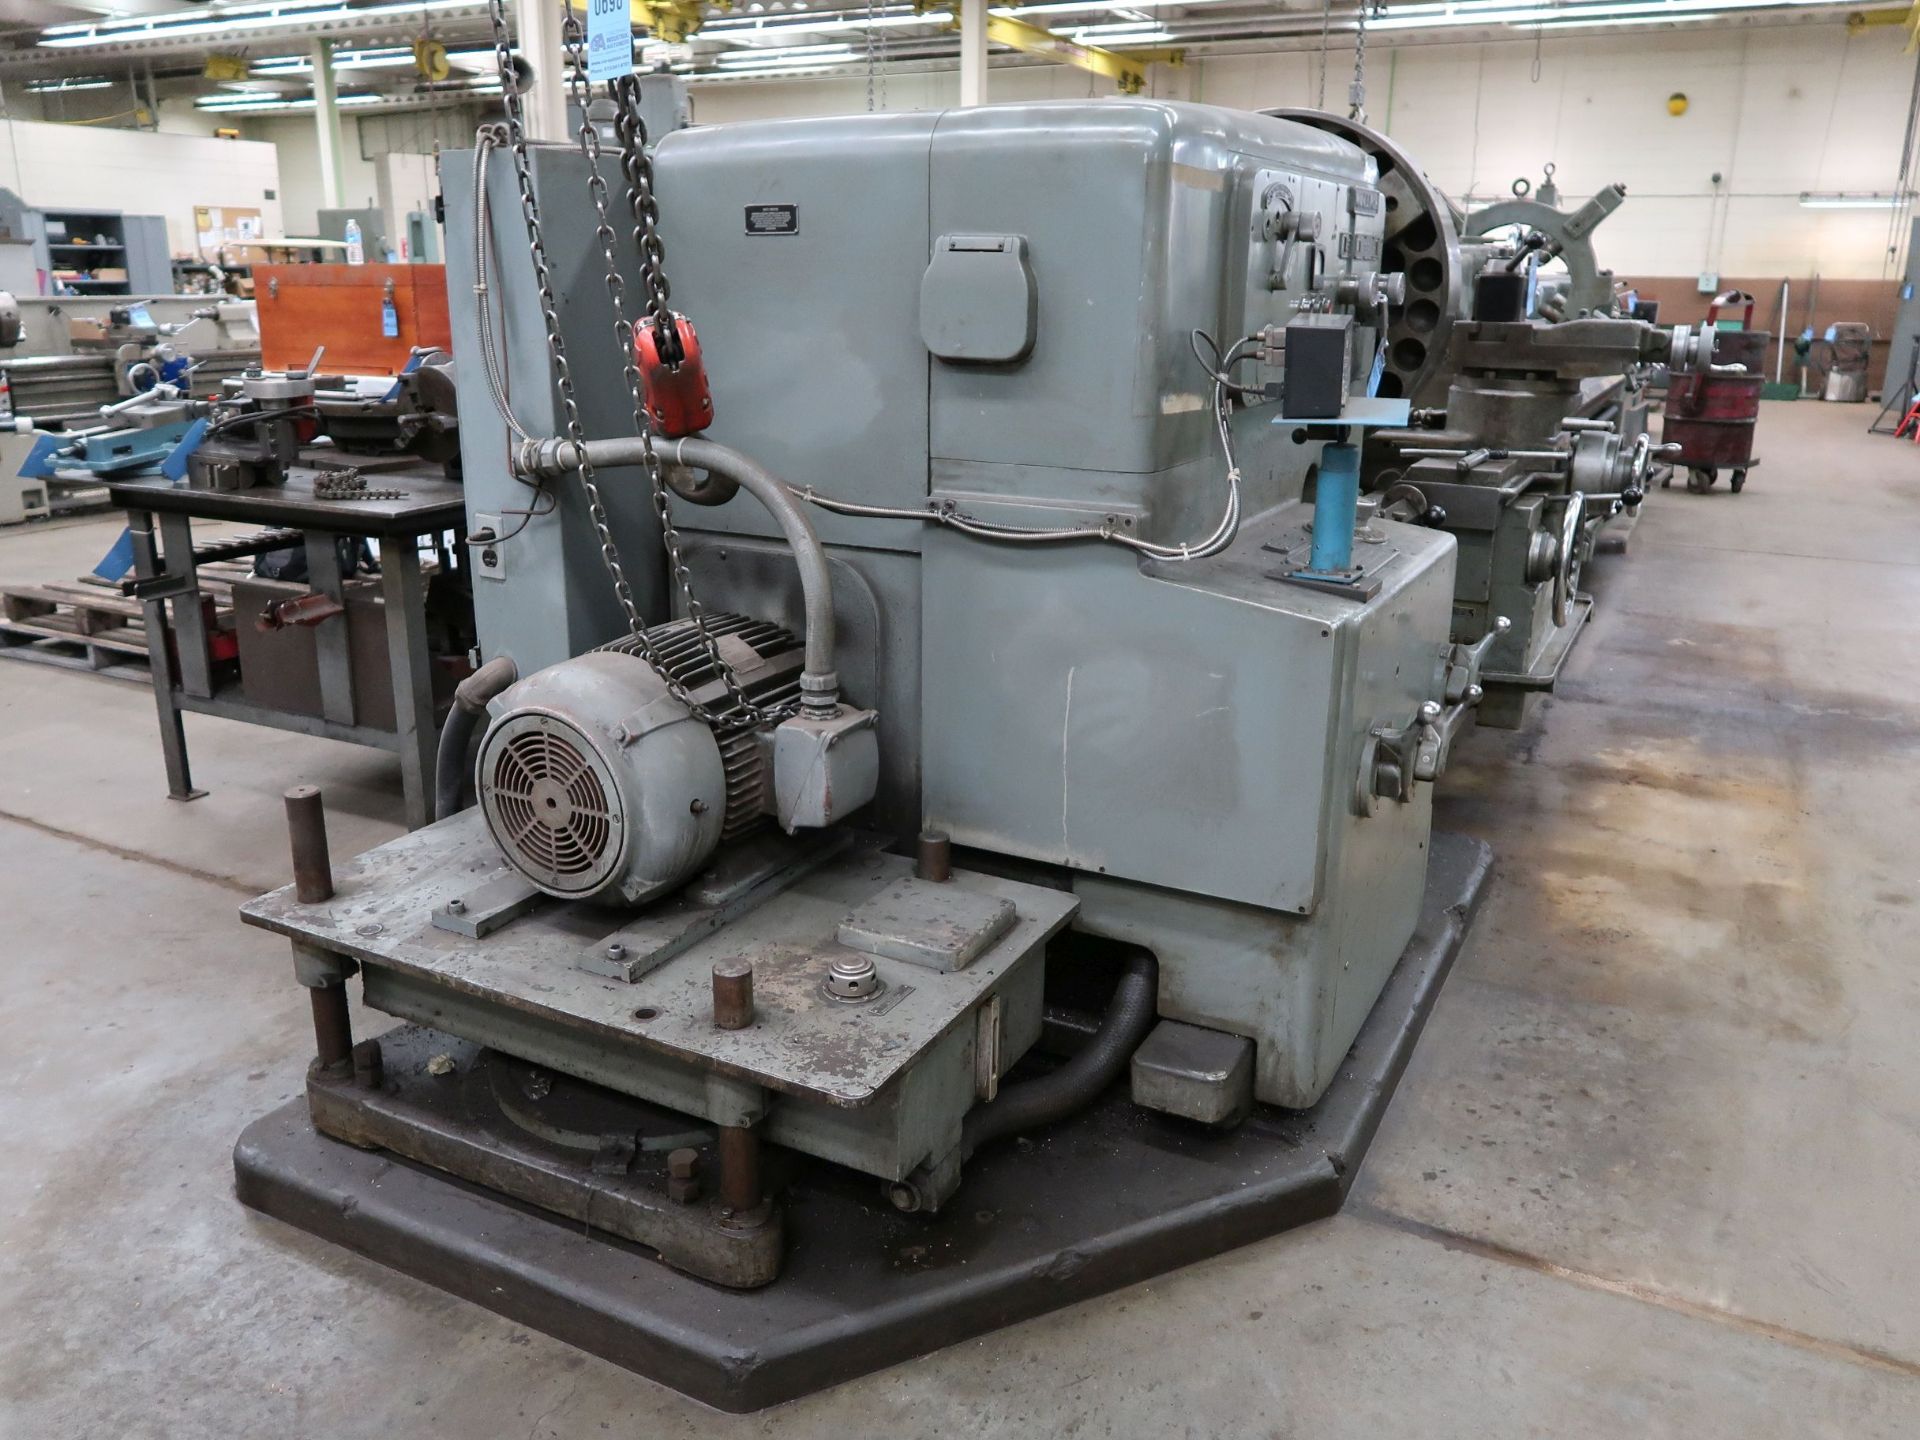 28" X 192" MONARCH MODEL 3220-28X192 GEARD HEAD ENGINE LATHE; S/N 49825, SPINDLE SPEED 31 - 1,140 - Image 4 of 17